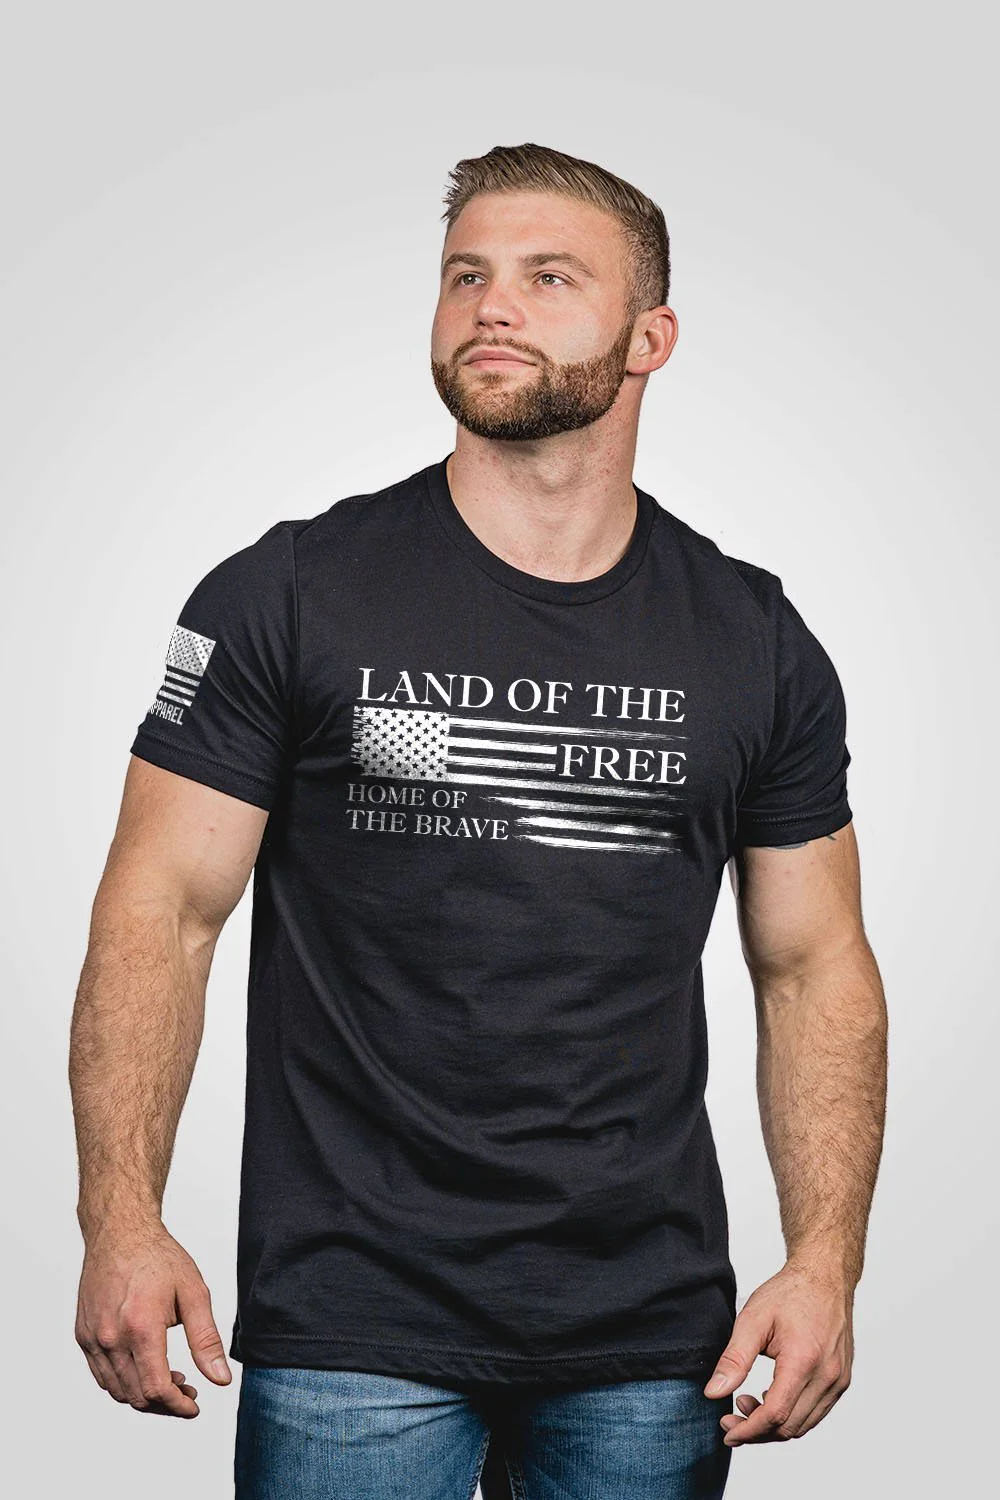 Nine Line Men's Home Of The Brave T-Shirt posted by ProdOrigin USA in Men's Apparel